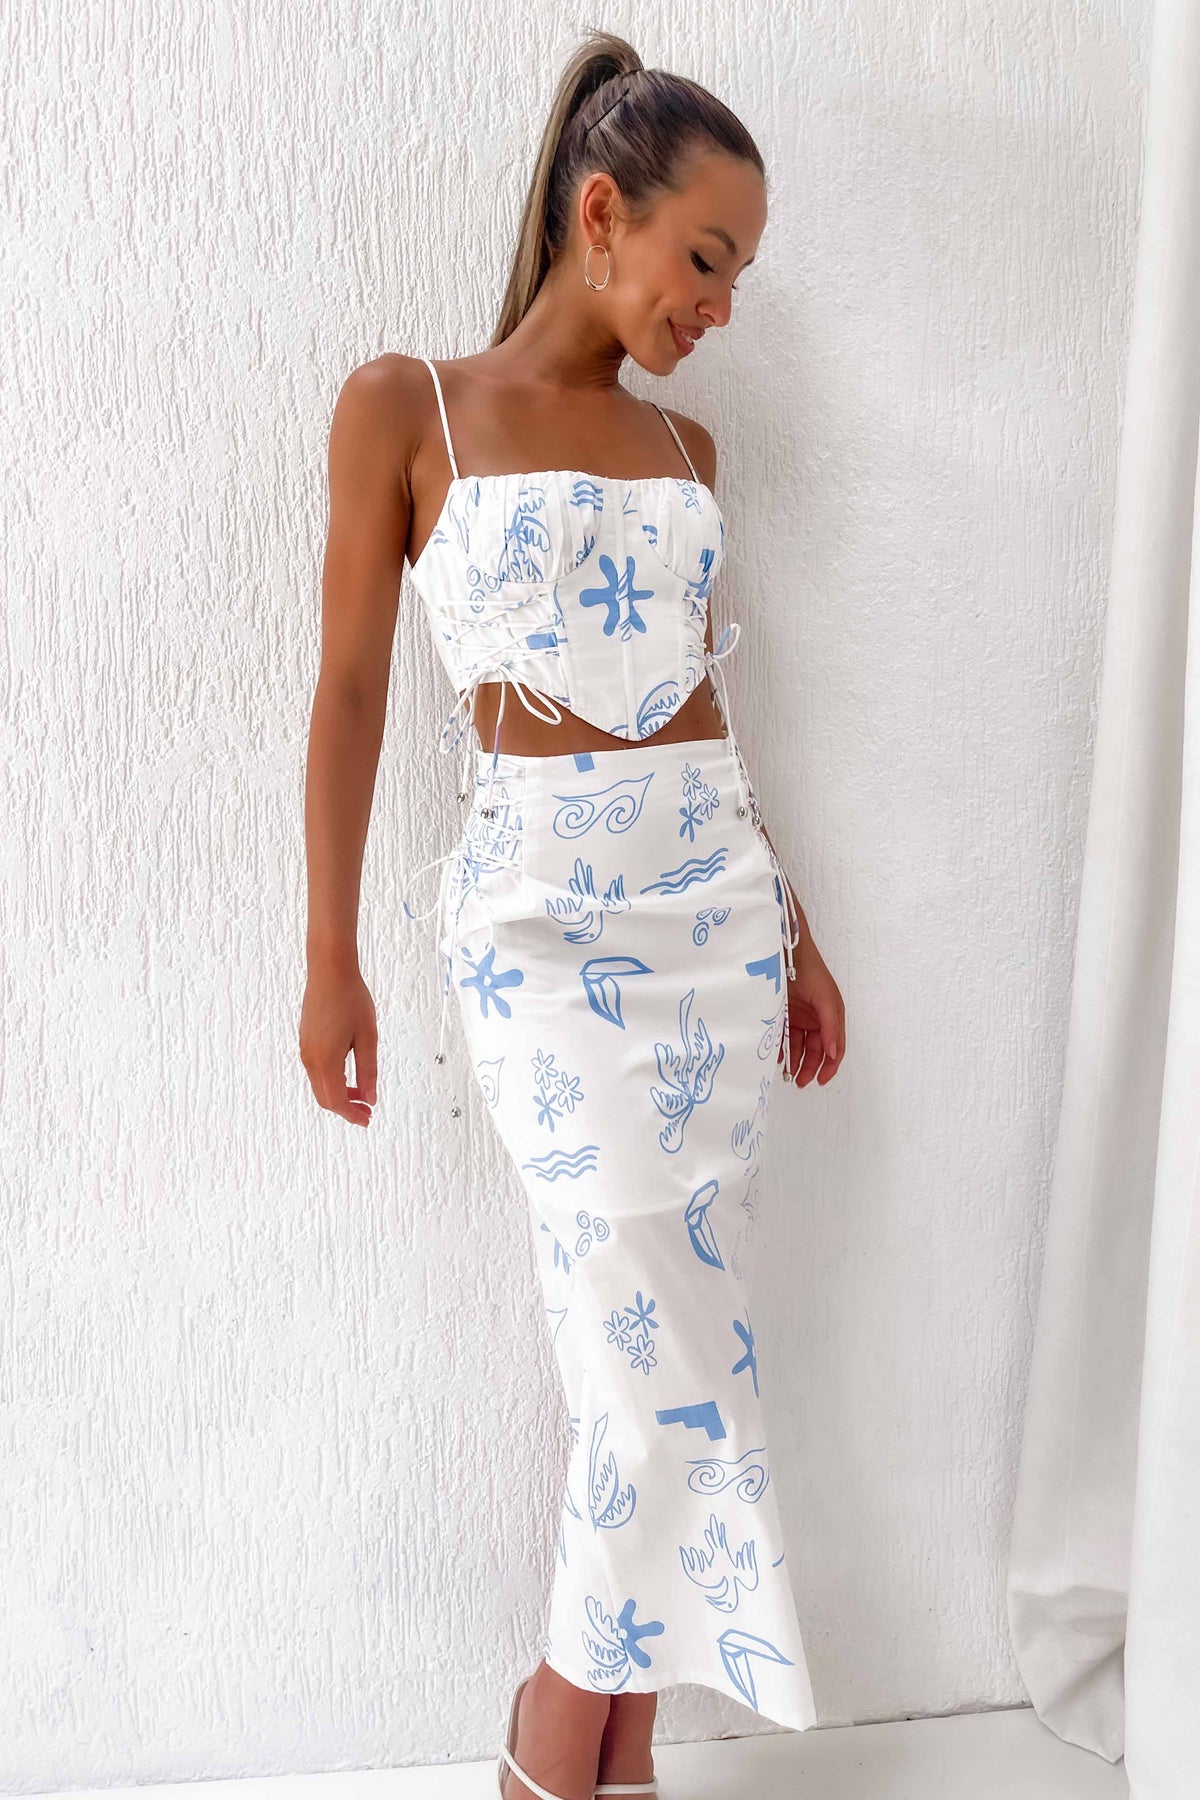 Laryssa Top, BLUE, COTTON &amp; POLYESTER, COTTON AND POLYESTER, CROP TOP, CROP TOPS, new arrivals, POLYESTER AND COTTON, TOP, TOPS, WHITE, , -MISHKAH